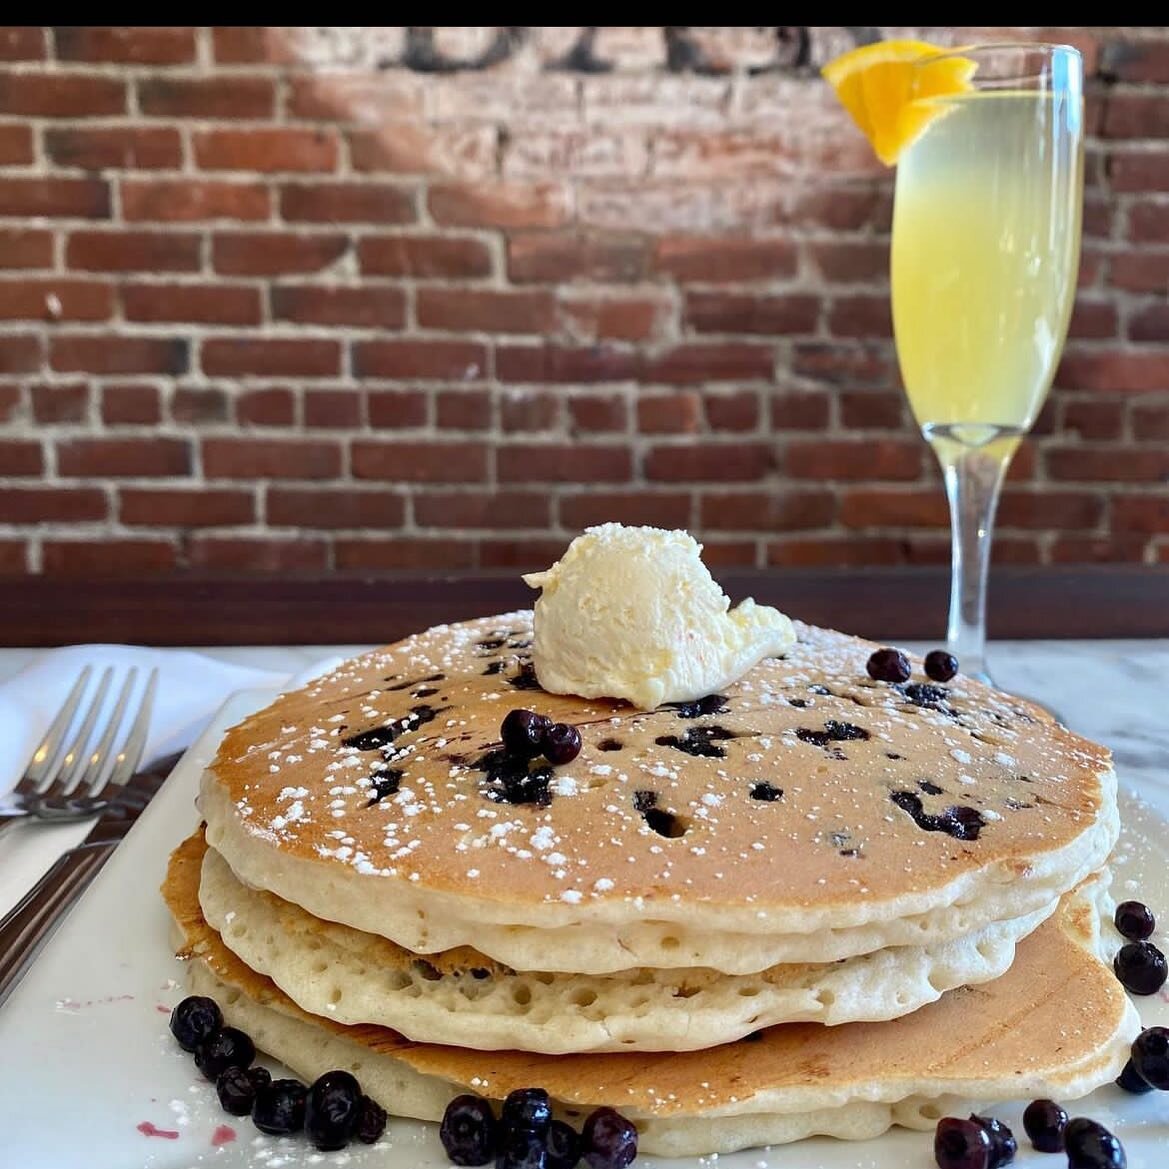 What&rsquo;s your favorite pancake flavor? 
.
.
.
.

#breakfast #food #foodie #foodporn #instafood #lunch #healthyfood #yummy #foodphotography #delicious #brunch #dinner #coffee #foodblogger #foodstagram #homemade #instagood #healthy #breakfastideas 